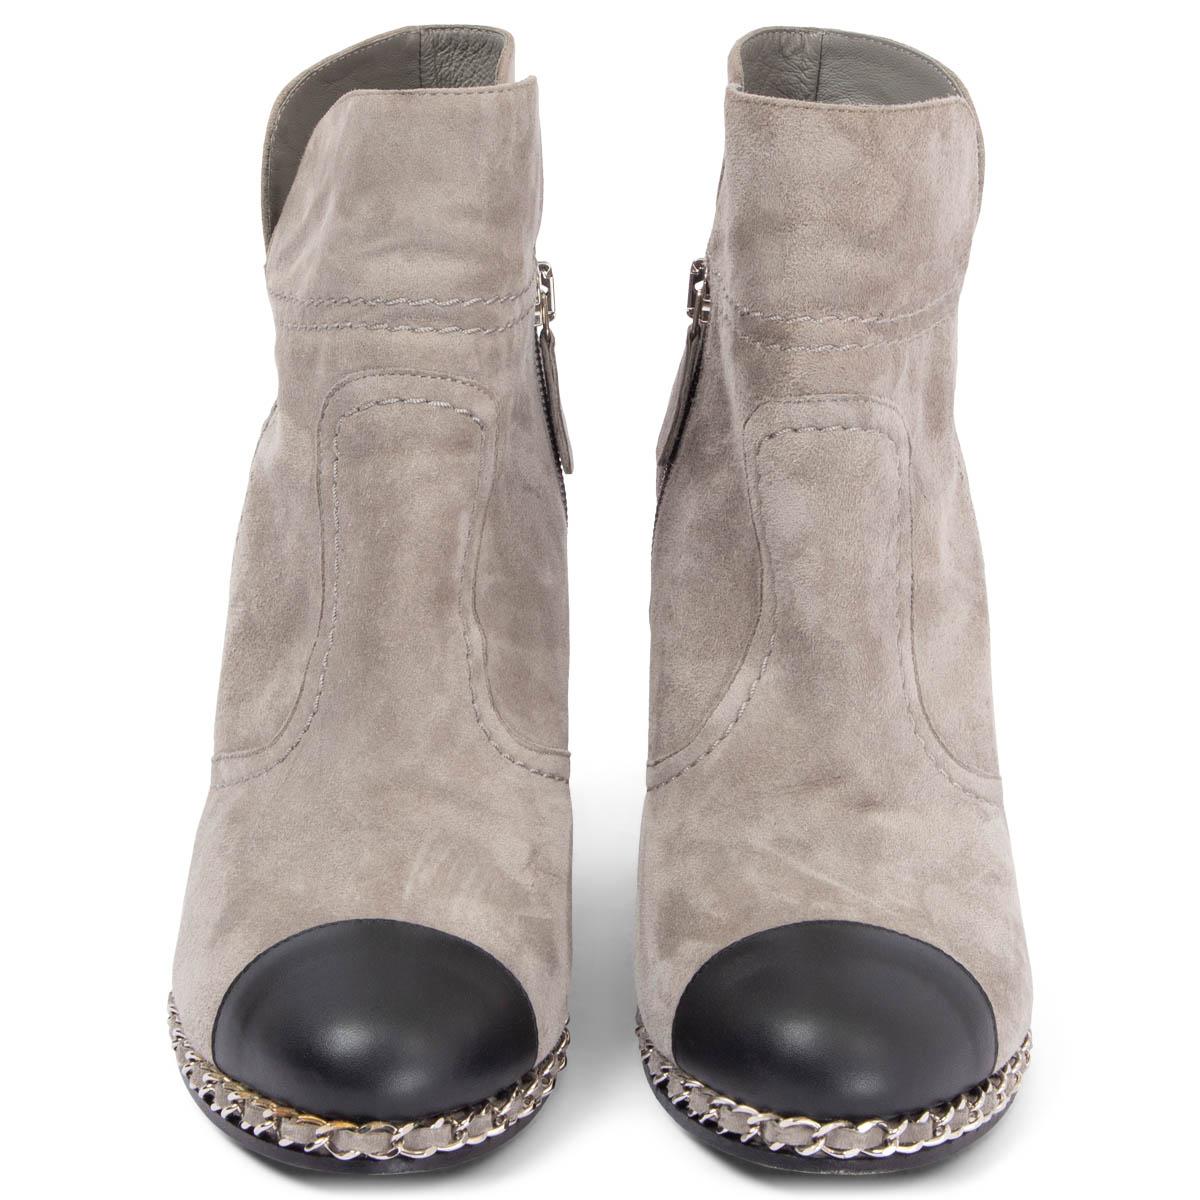 100% authentic Chanel wedge boots in grey suede with chain-trim along the sole and black leather toe-cap. Open with a zipper on the inside. Have been worn and one shoe shows a few marks near the zipper. Otherwise in excellent condition.

2011